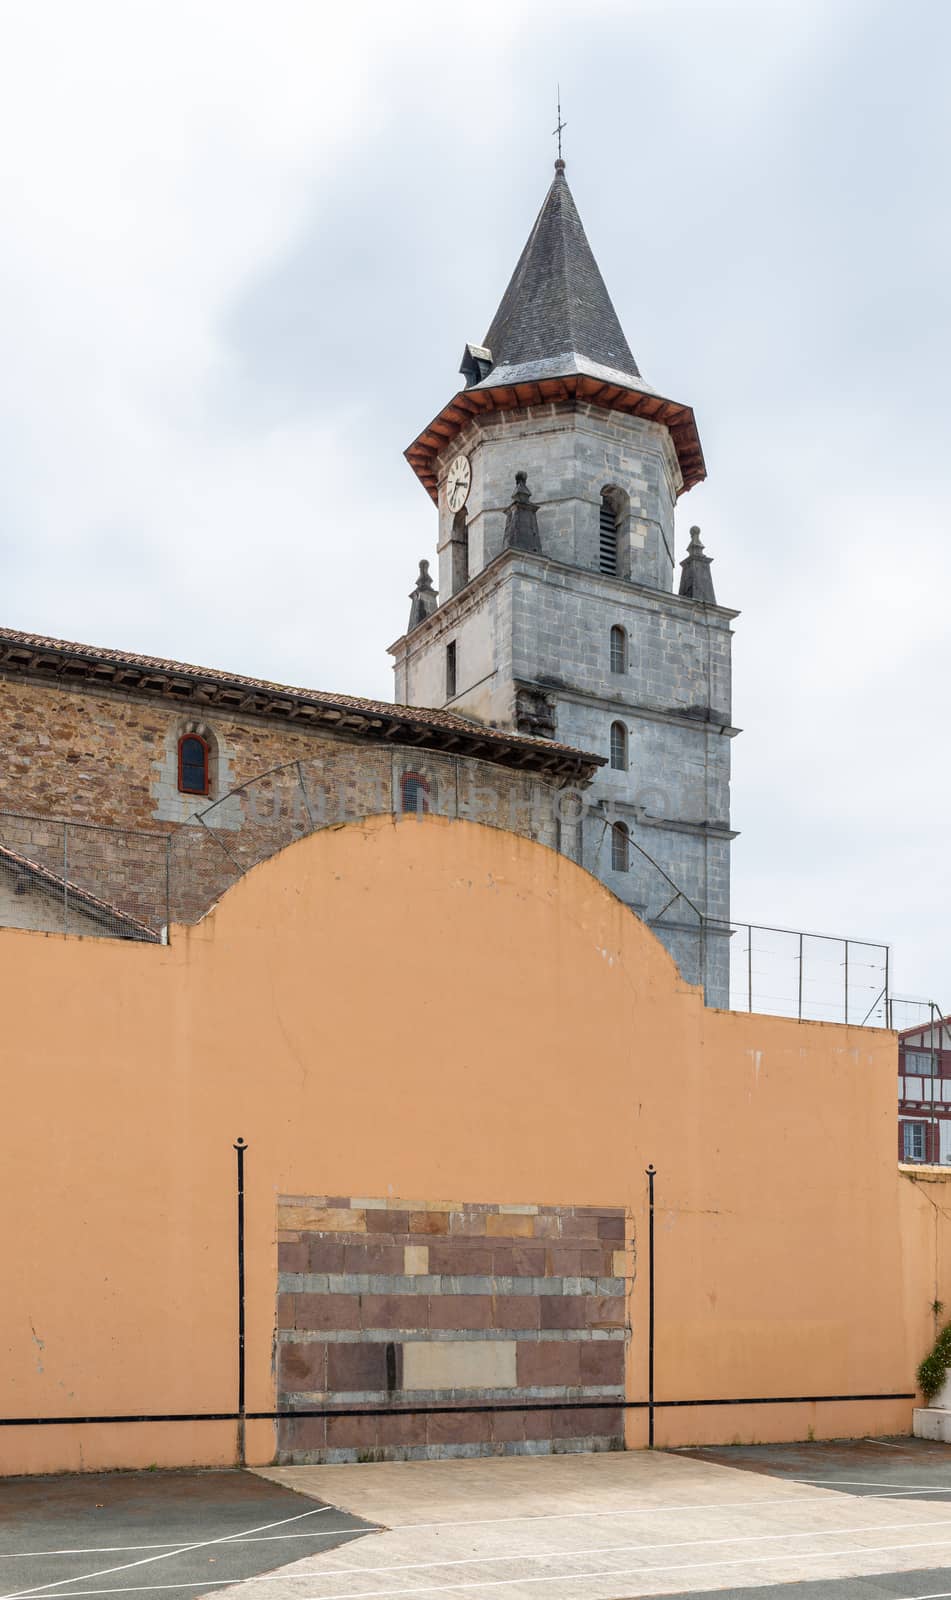 Basque pelota wall and court in Ainhoa, France. Church in the background.